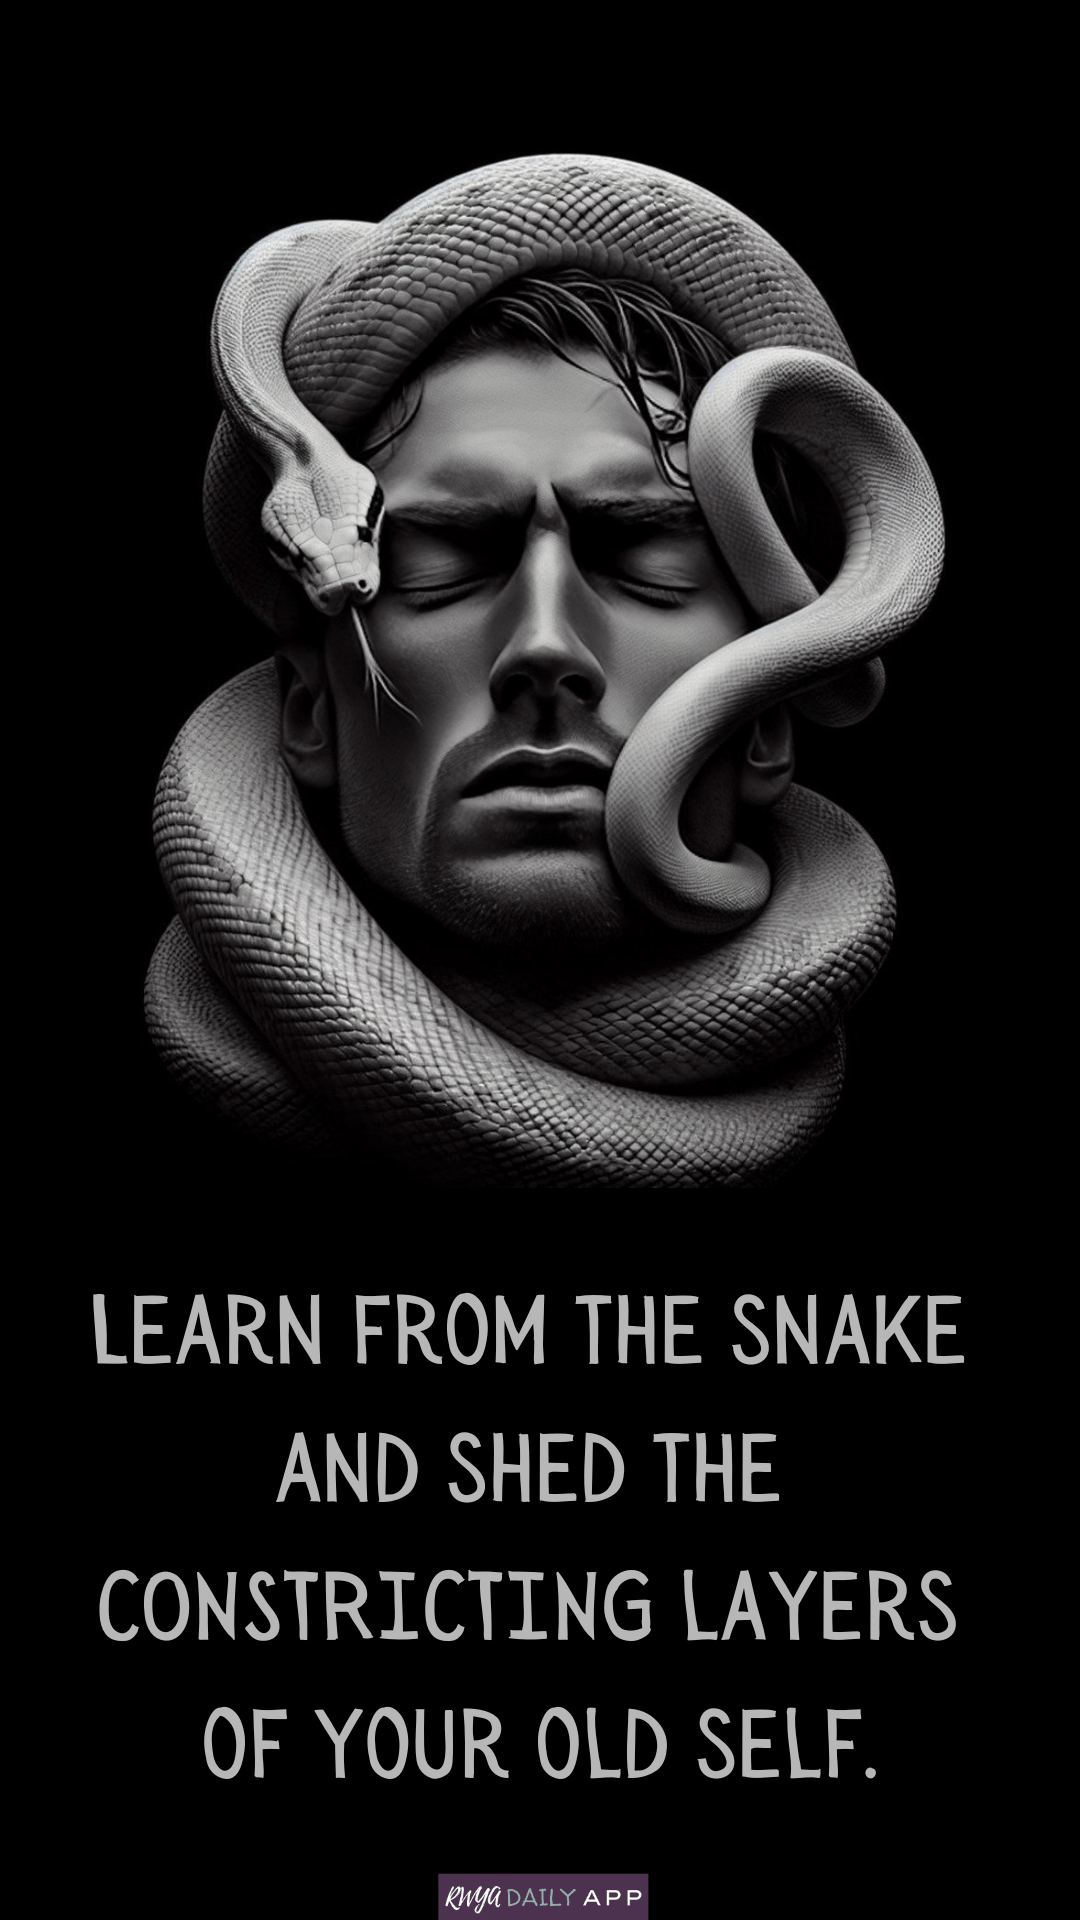 Learn from the snake and shed the constricting layers of your old self.